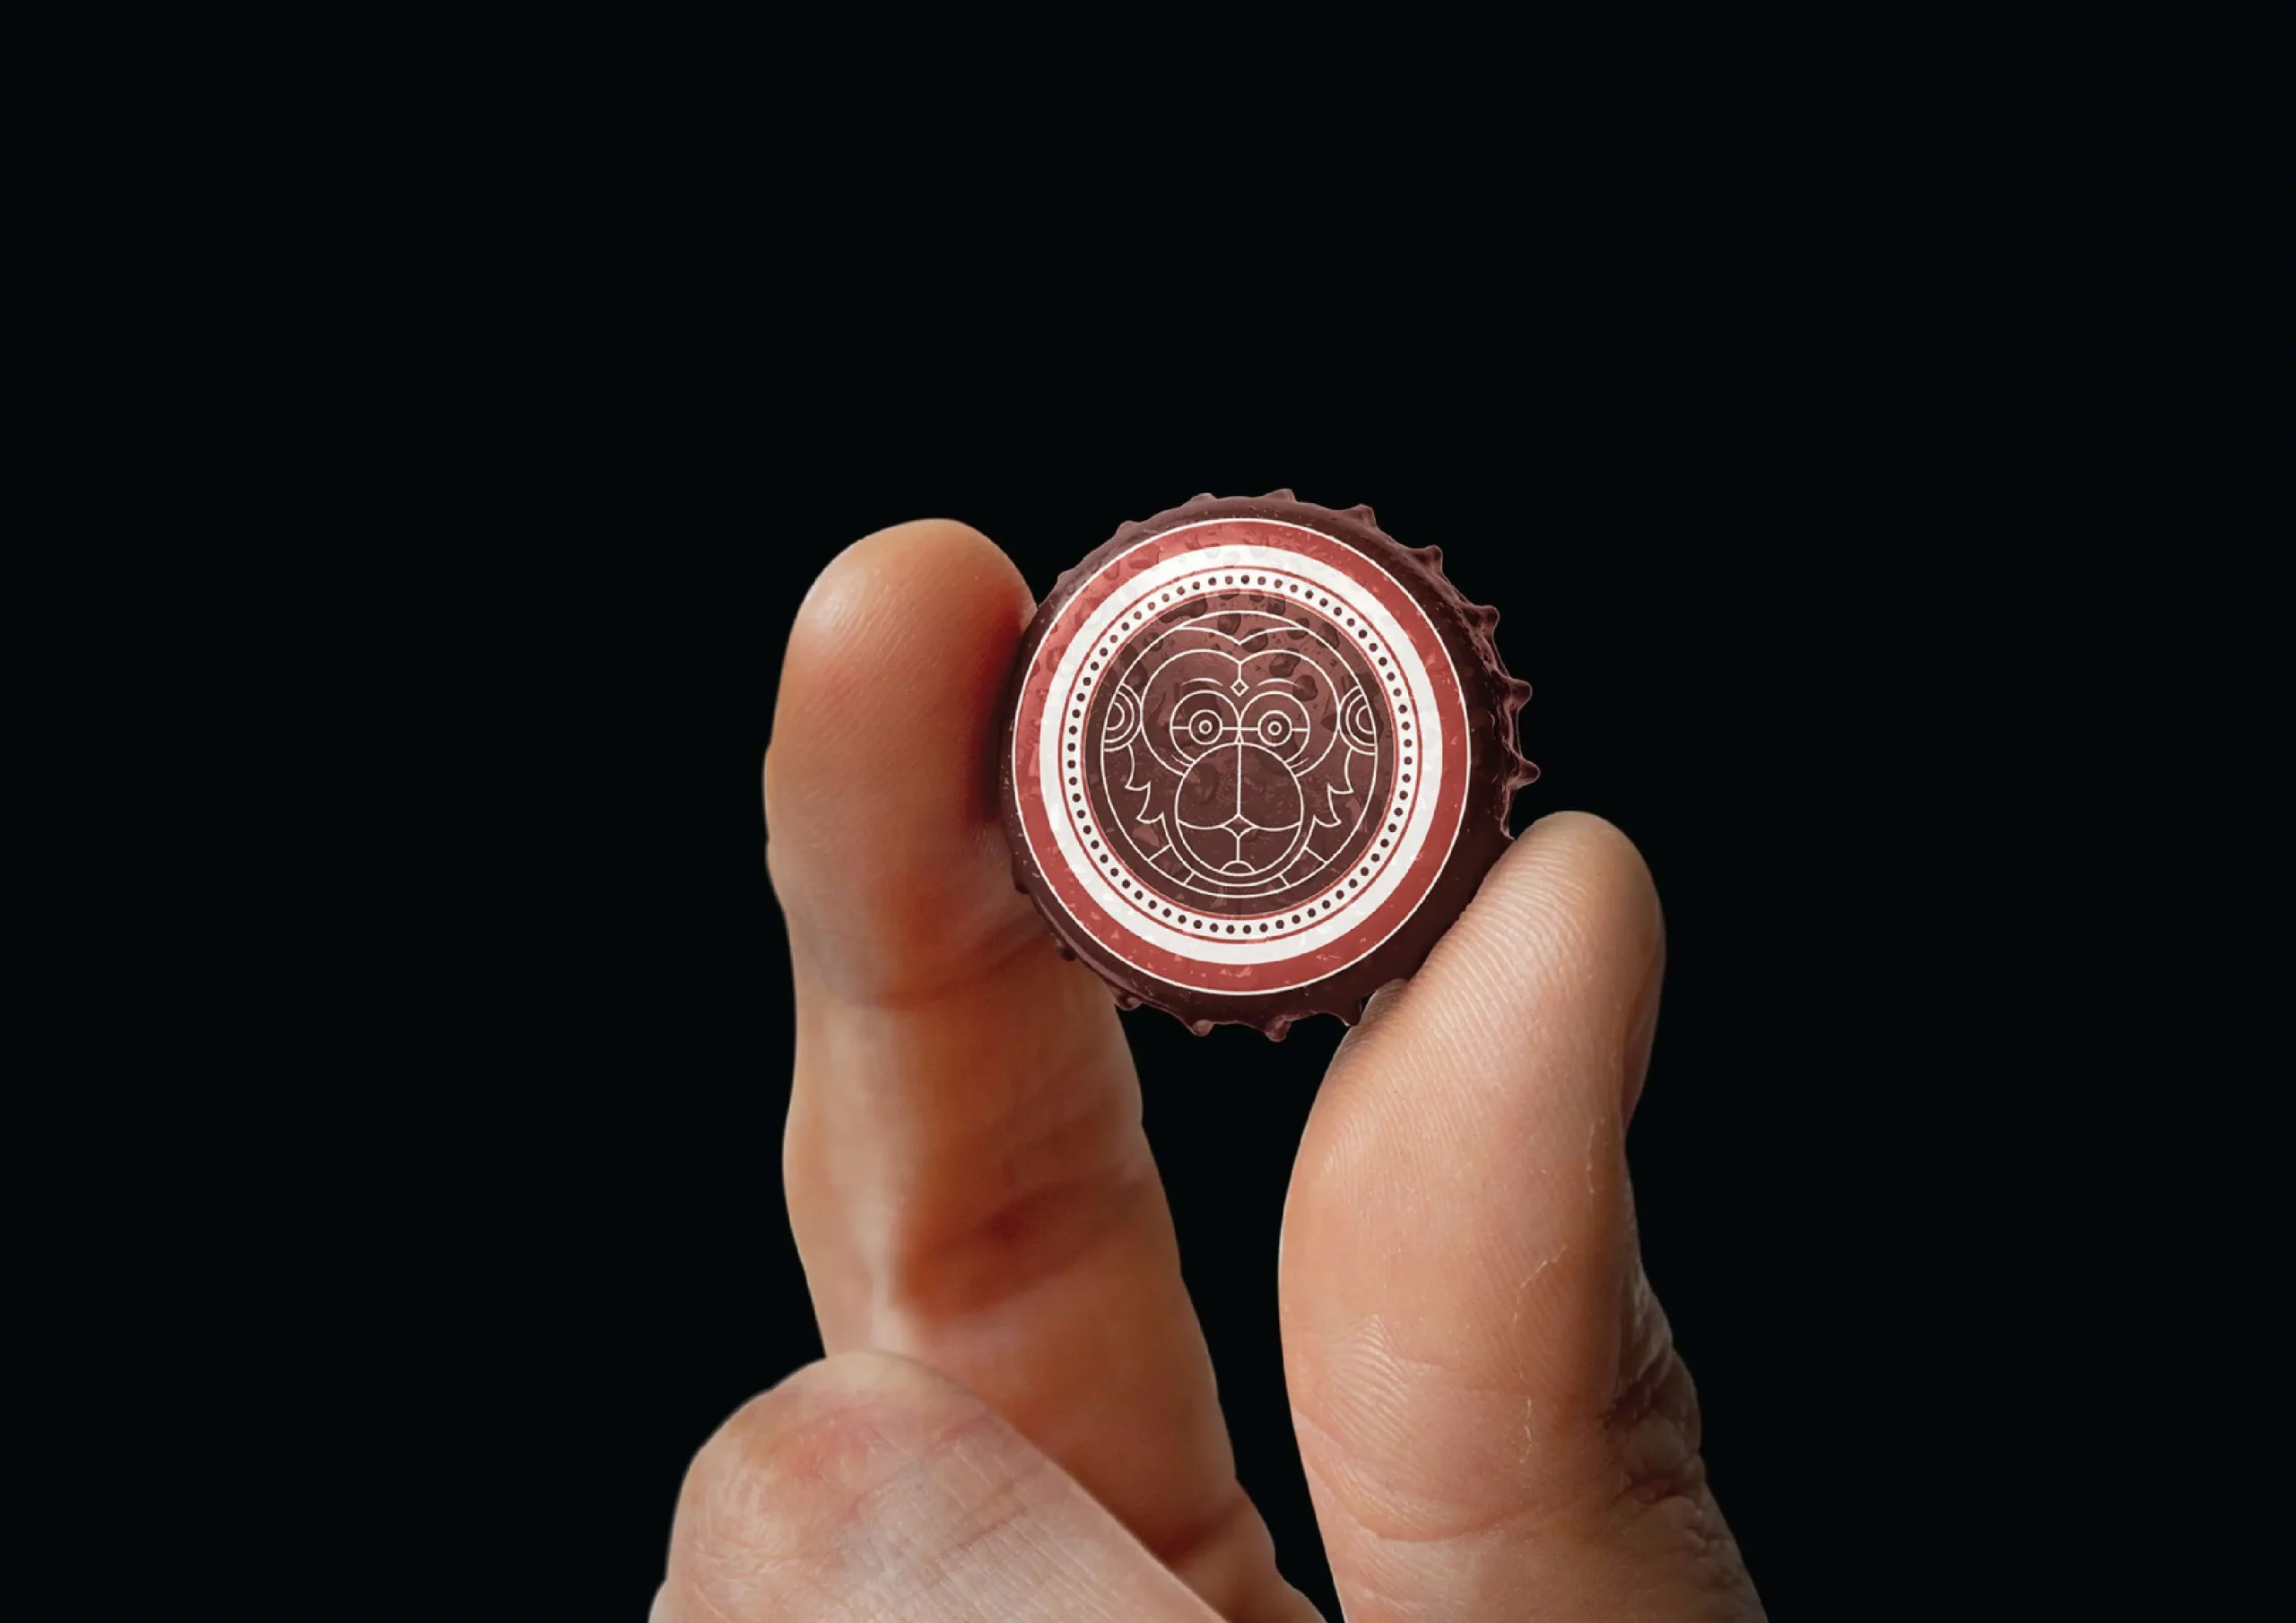 A person's hand holding a bottle cap with a logo on it.